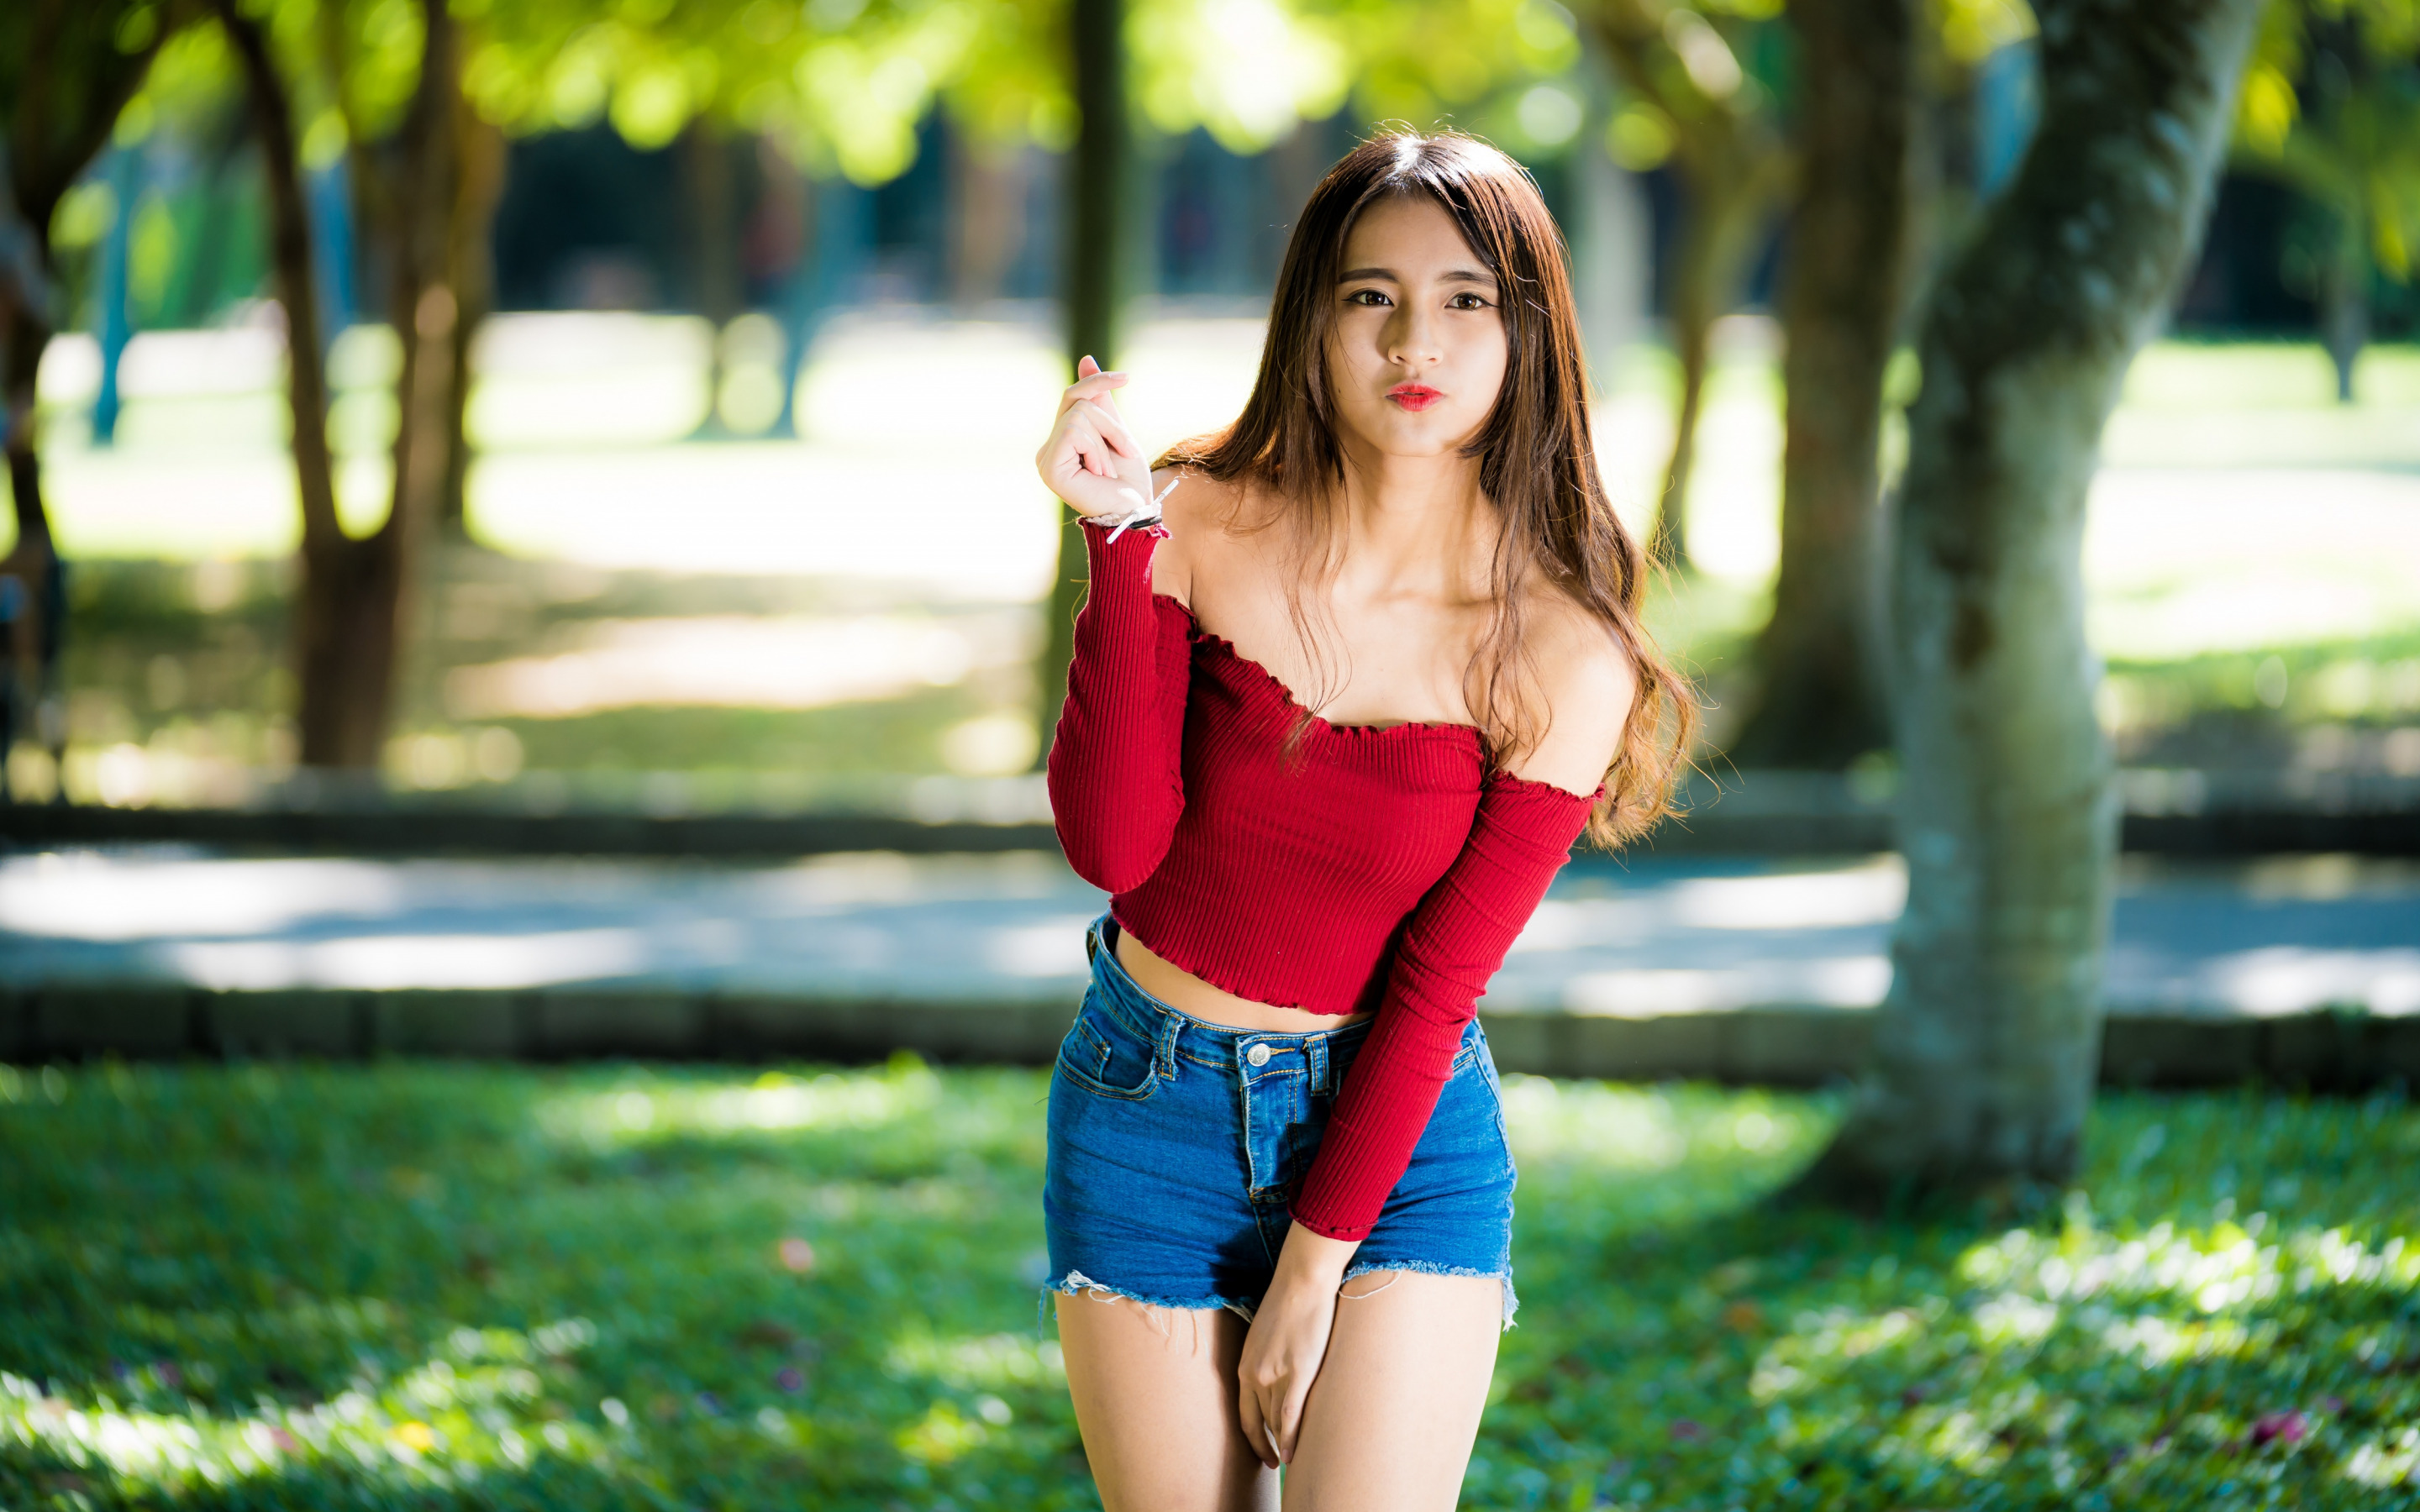 Model Red Lipstick Red Tops Jeans Standing Asian Women Outdoors Bare Shoulders Crop Top Jean Shorts 2880x1800